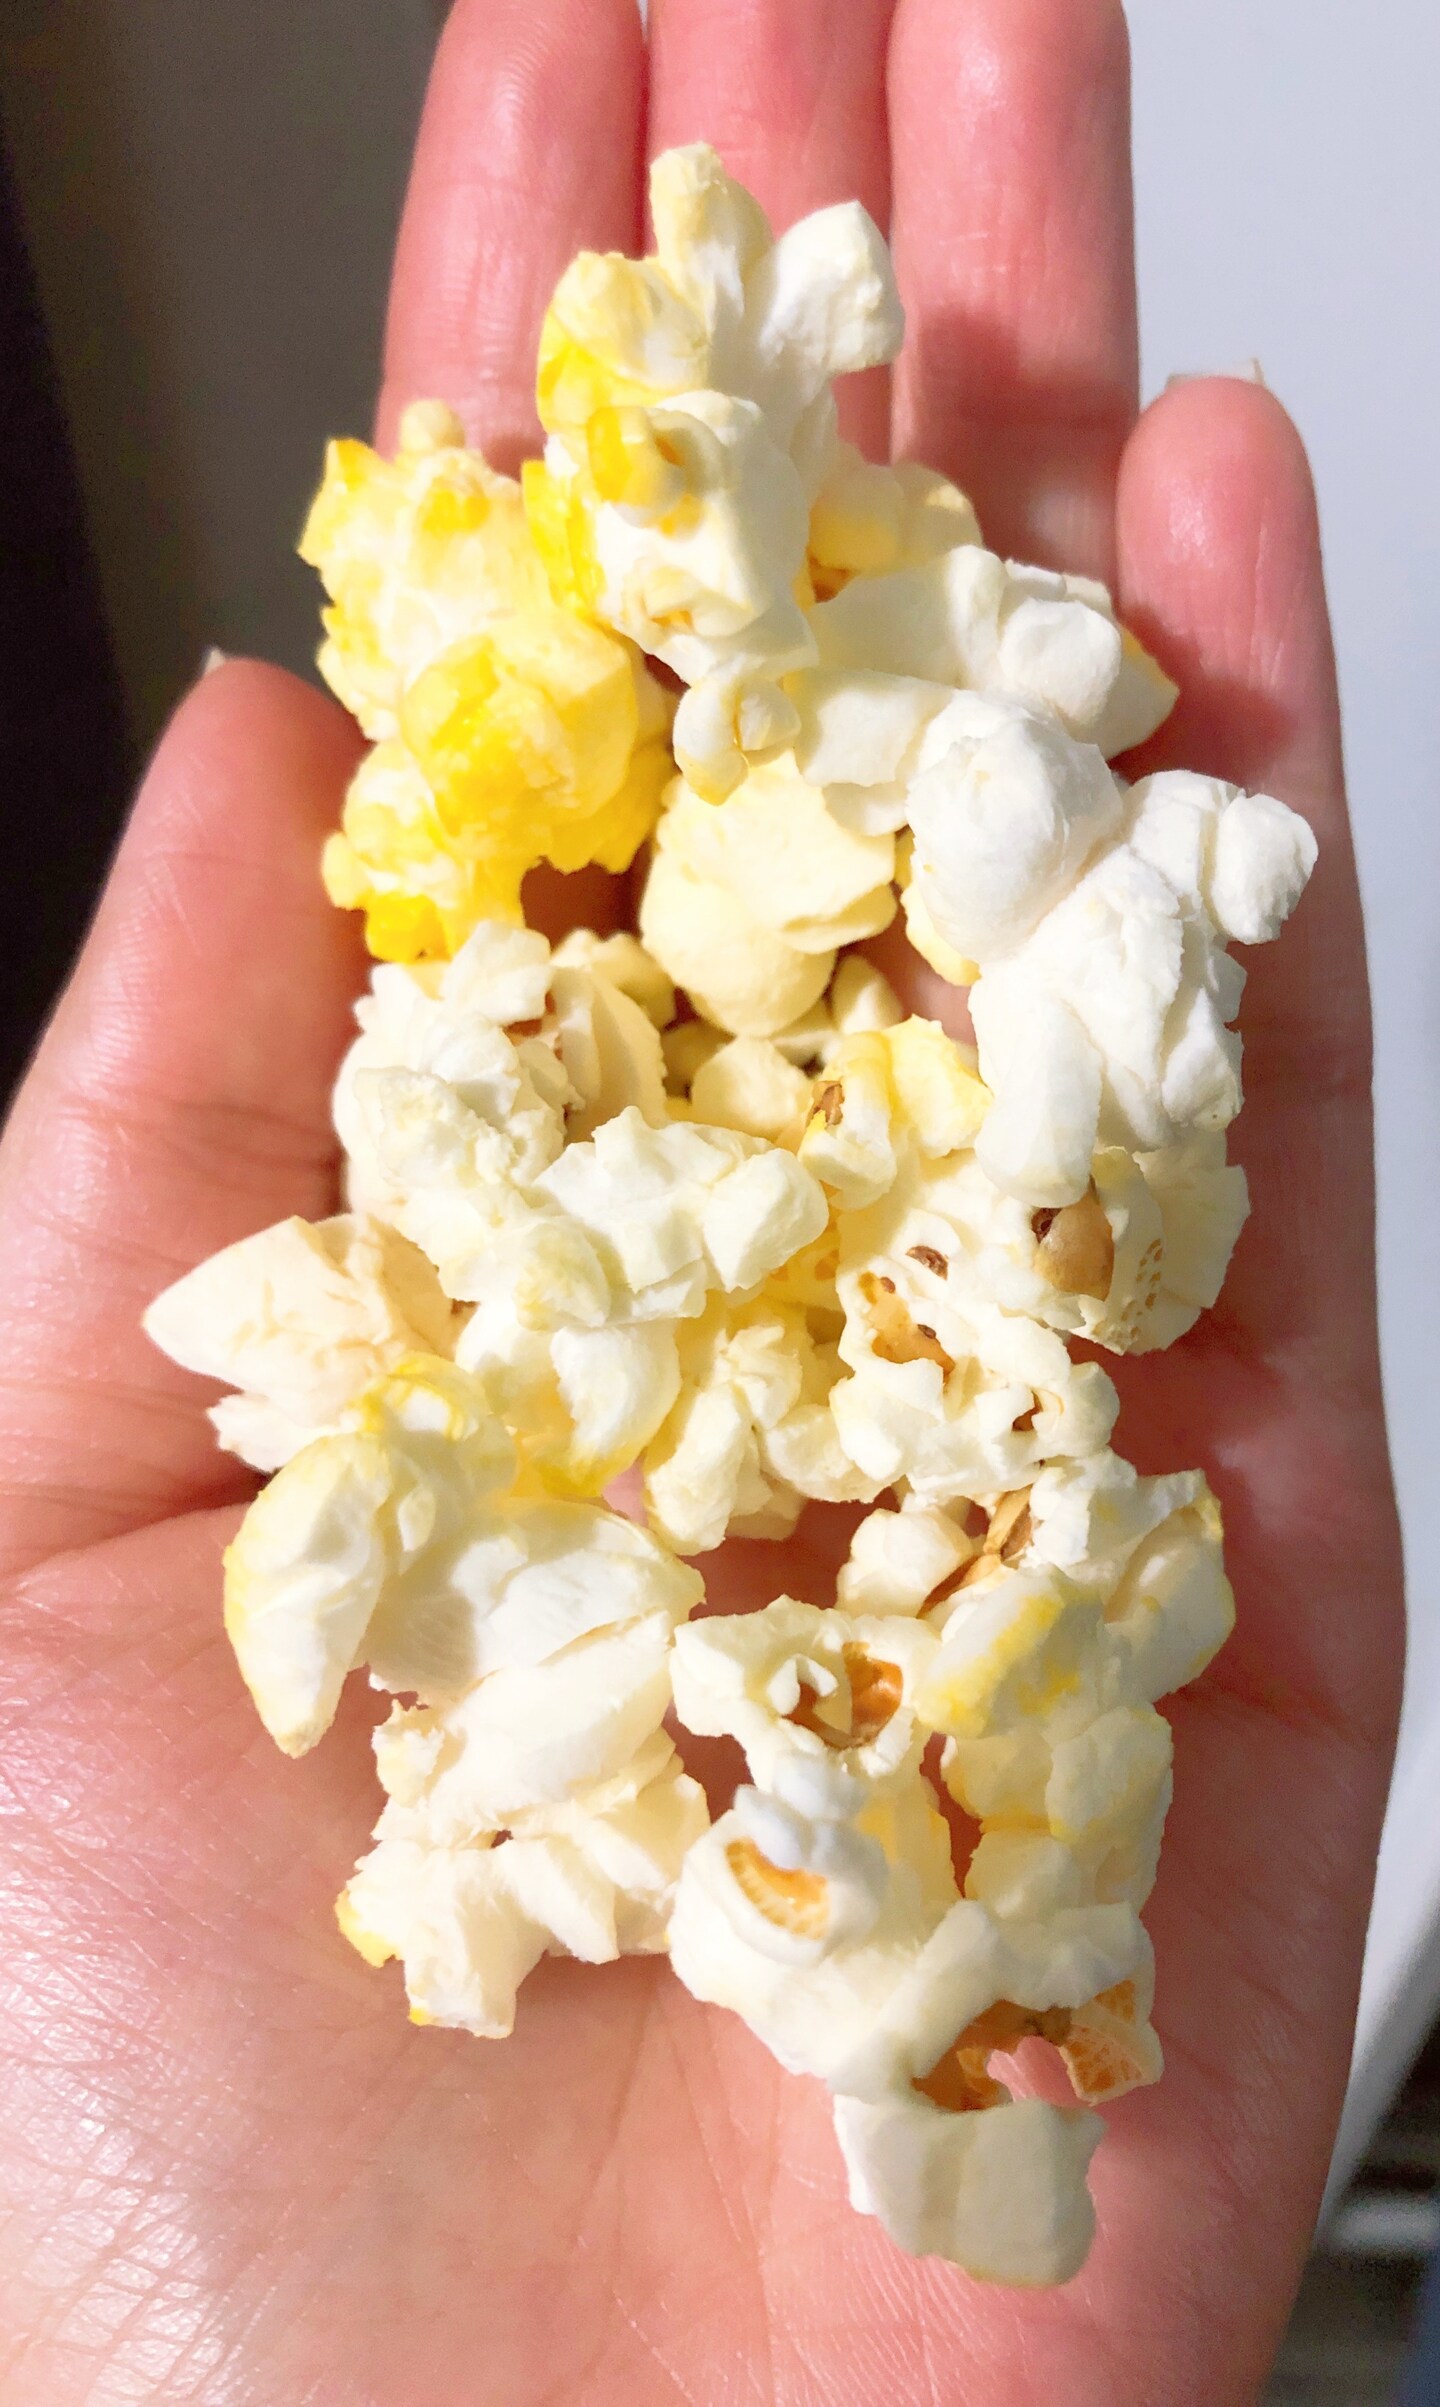 25pc Realistic Popcorn Silicone Mold | For Soap | Candle embeds | Wax Melts